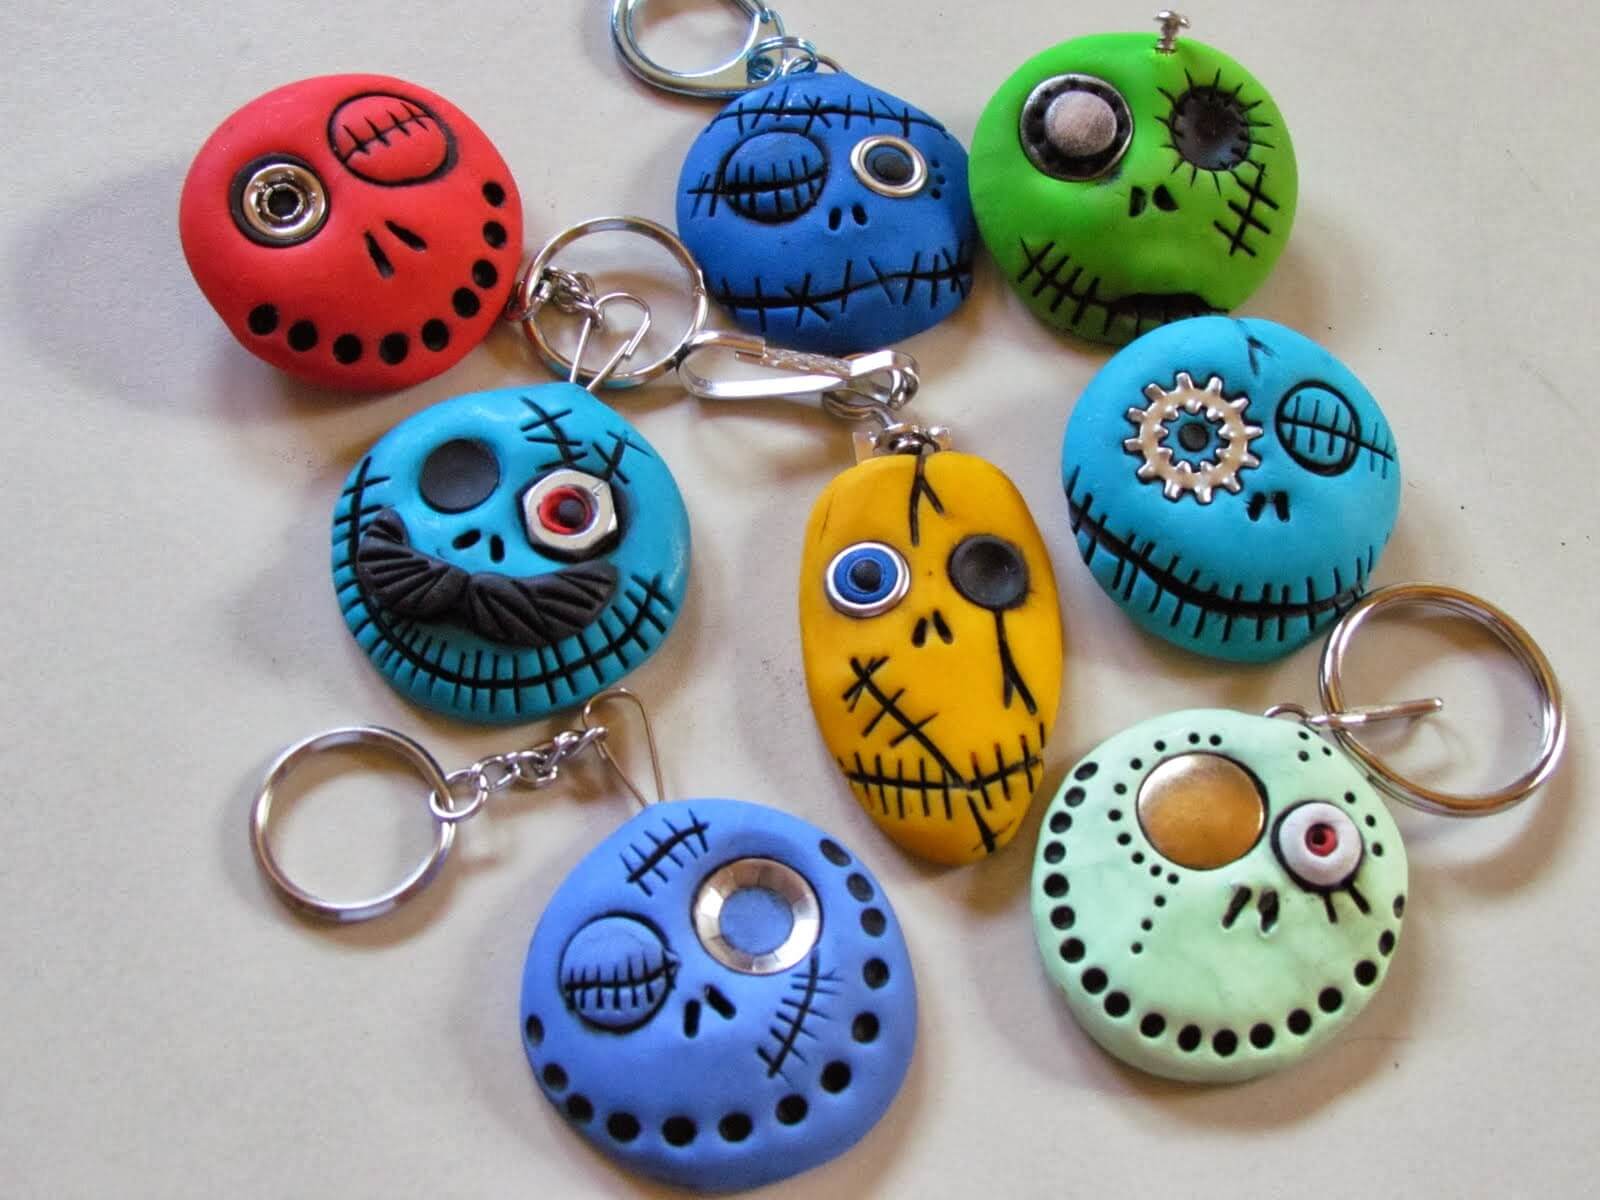 Amazing Monster Key Chains Craft Using Air Dry Clay